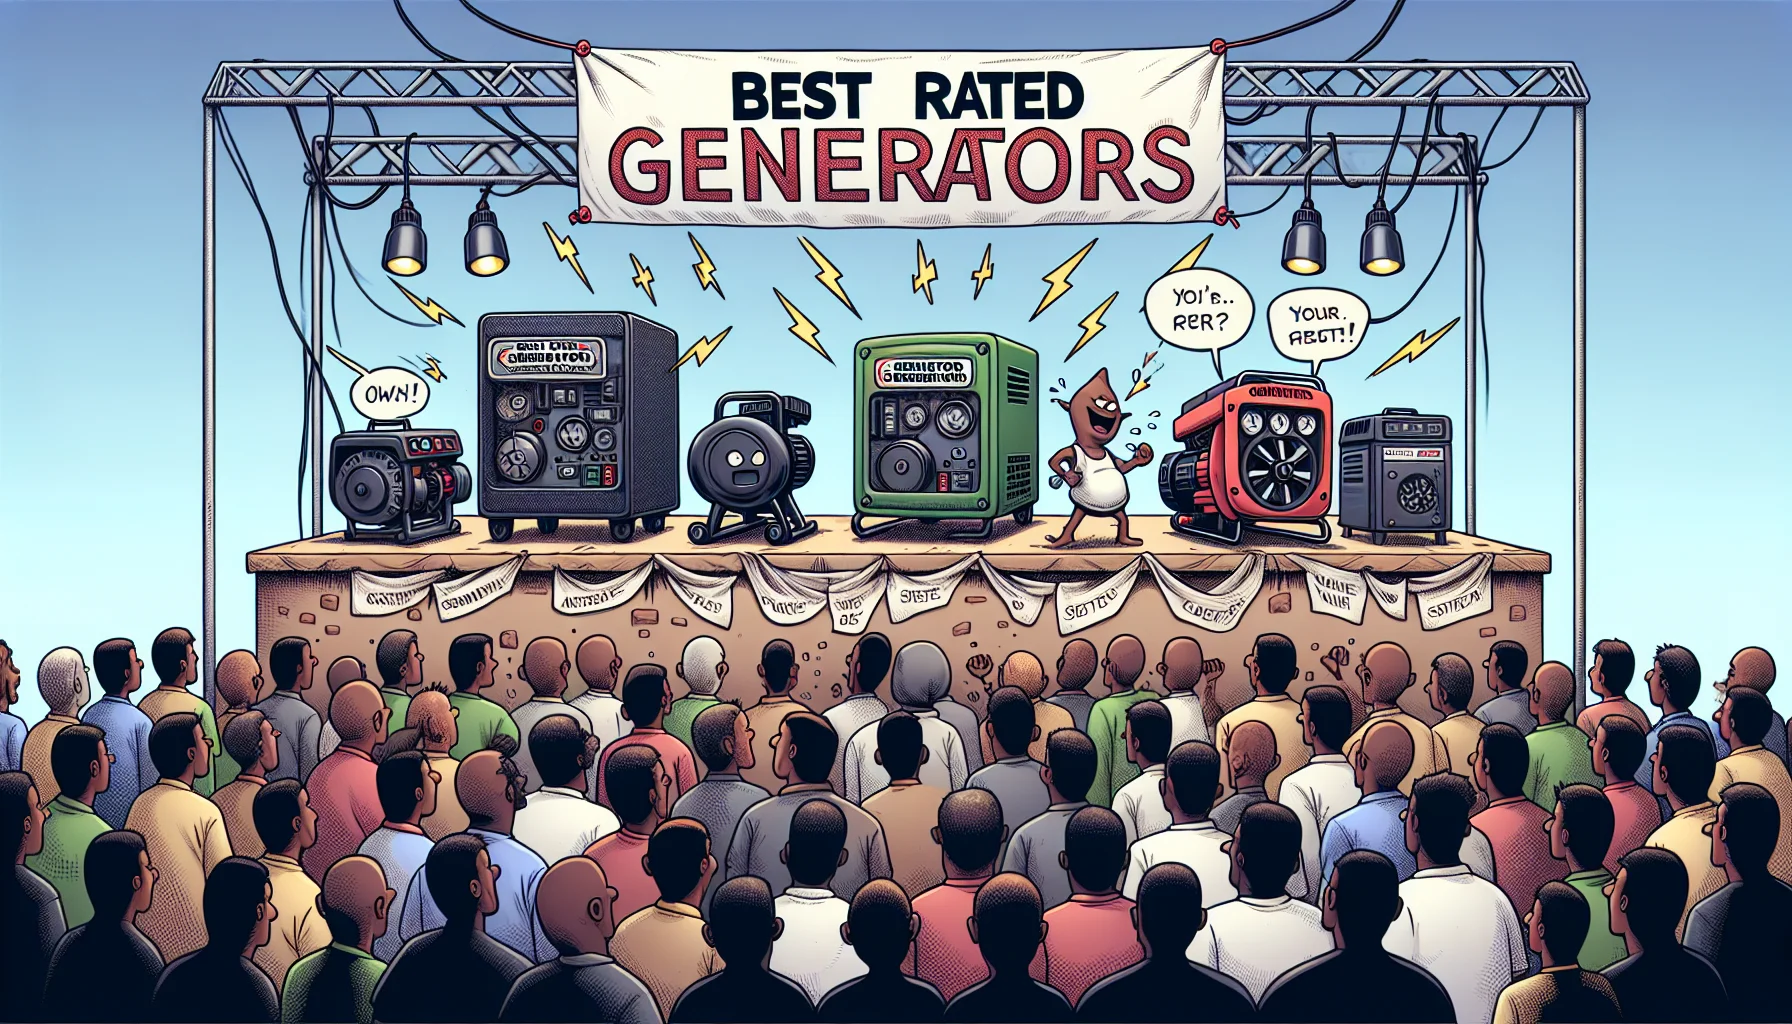 Create a comic-like and realistic scene of a generator competition. There are multiple generators of various shapes and sizes that are on a makeshift stage under a large banner that reads 'Best Rated Generators.' Each generator displays its unique characteristics and is anthropomorphized, expressing distinct, humorous personalities like cheeky, nervous, confident, etc. A large, enthusiastic, diverse crowd of men and women of varied descents like Hispanic, Black, White, Middle-Eastern, and South Asian watches with interest. Incorporate elements to display that this is a competition to produce electricity, such as bright light bulbs and wire connections.